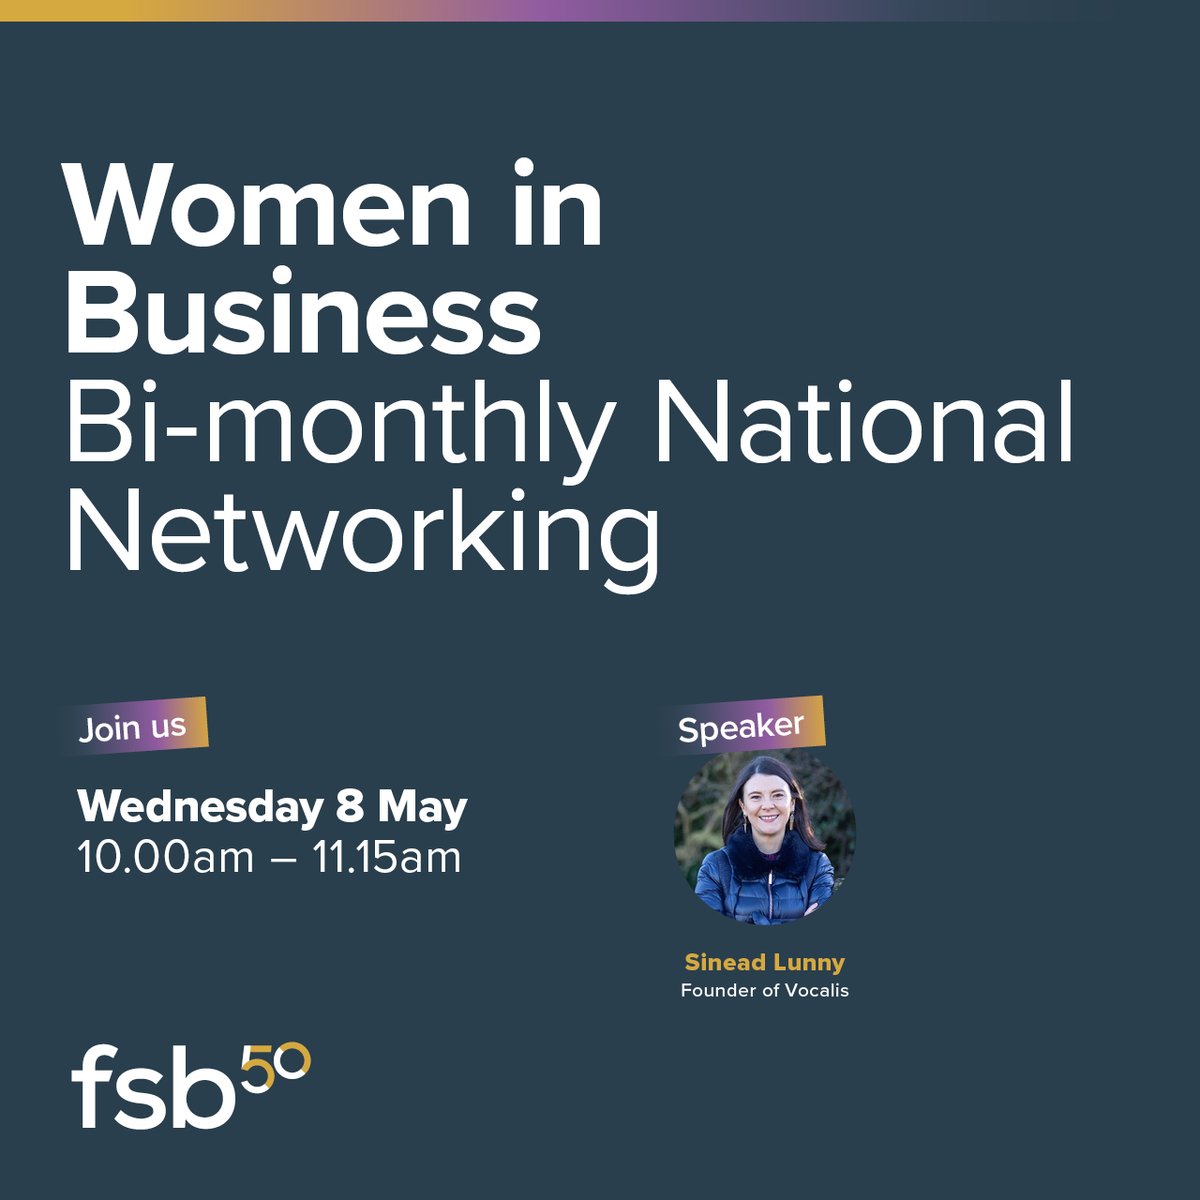 🌟 Join our National online networking for women in business. 🌟 🤝 Meet other business owners form across the UK, expand your network and make meaningful new connections, at the event designed for entrepreneurs like you! Register now 🔗 go.fsb.org.uk/4avNX5t